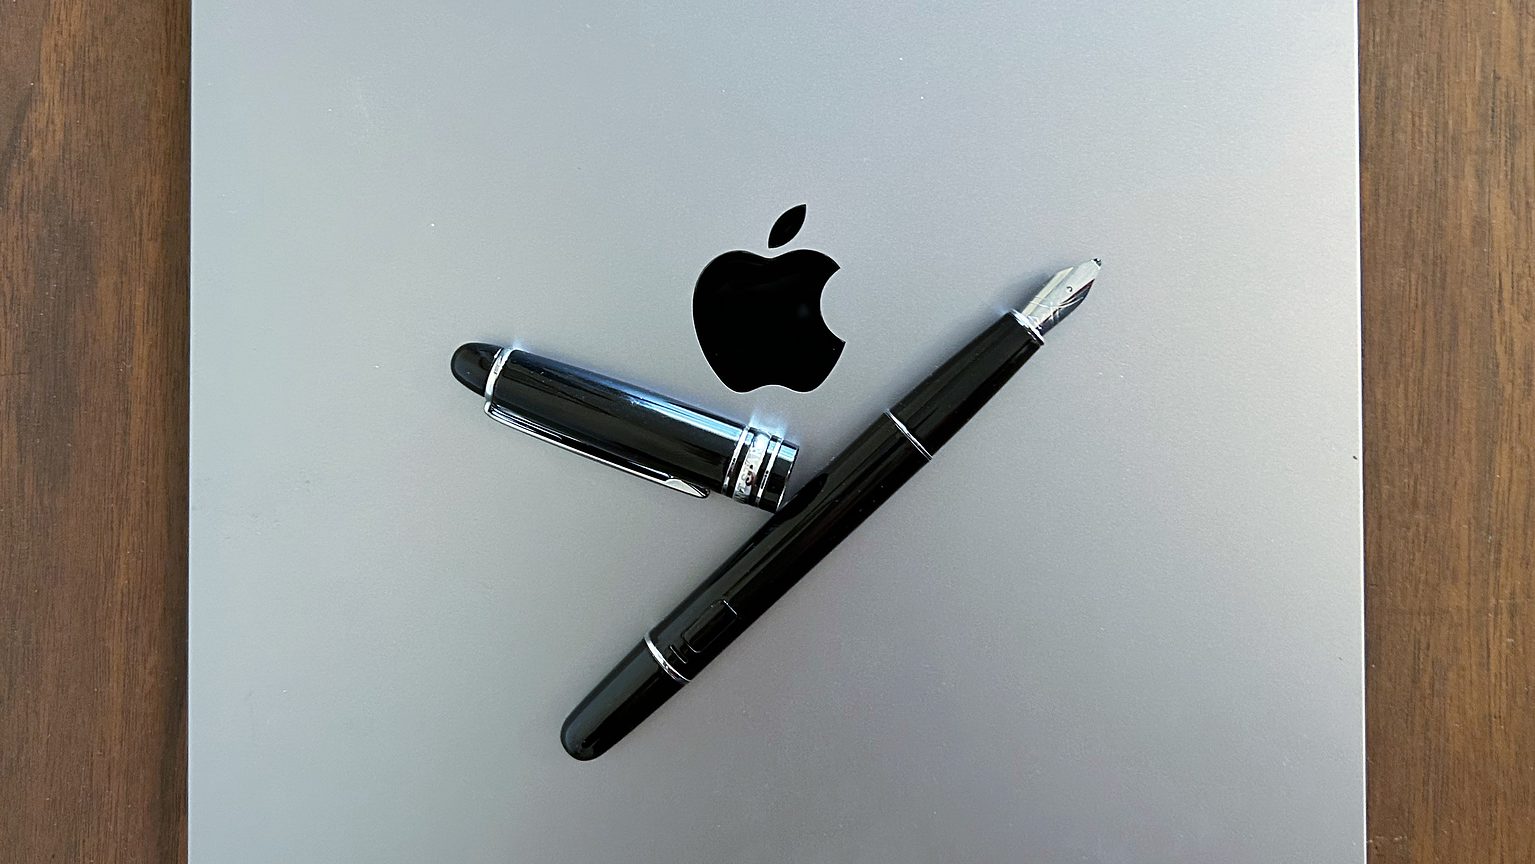 Adonit Star iPhone stylus review